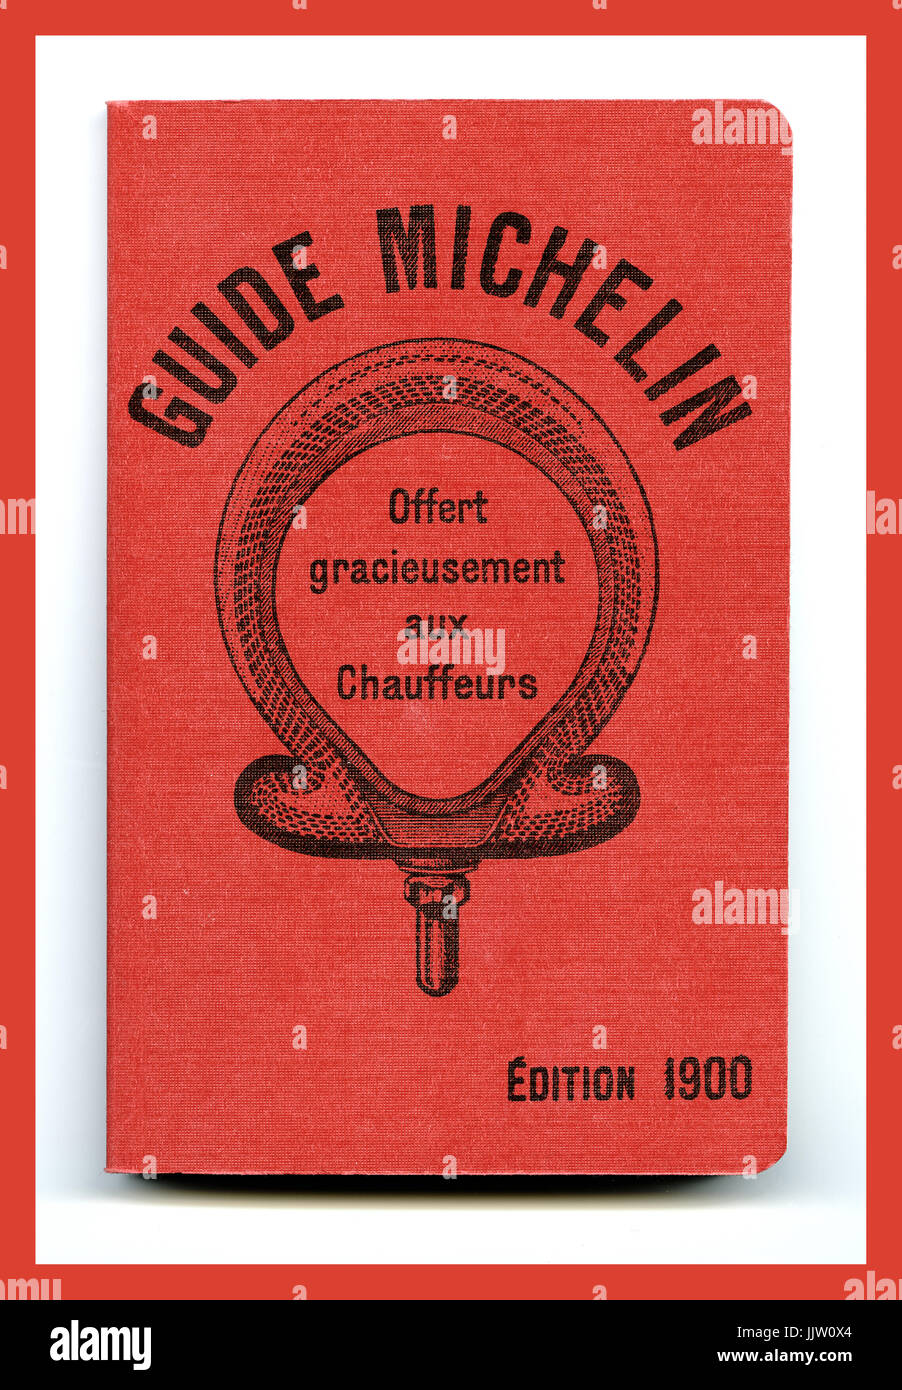 The first ever MICHELIN GUIDE It was created by the Michelin brothers in 1900 and 35,000 copies were printed for the World Fair in Paris France 'offert gracieusement aux chauffeurs/ reimpression du premier guide rouge' Paris France Stock Photo